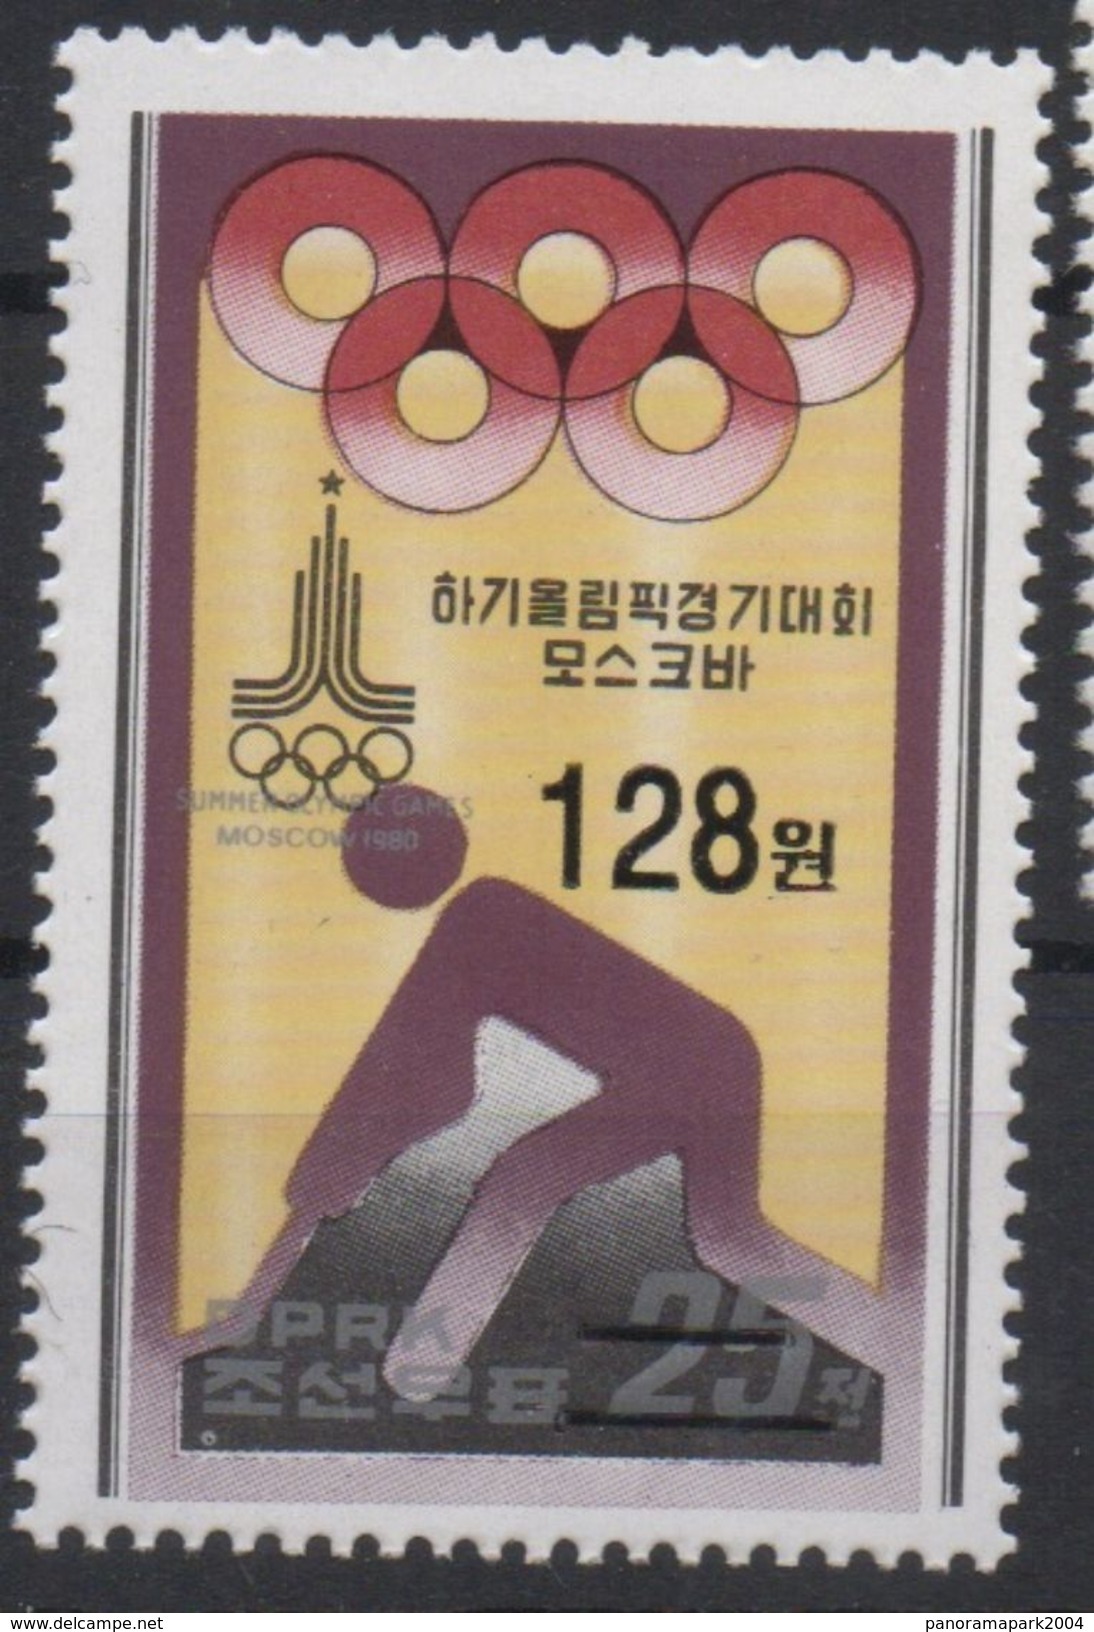 North Korea Corée Du Nord 2006 Mi. 5098 OVERPRINT Olympic Games Jeux Olympiques MOSCOW MOSCOU 1980 MOSKAU MNH** Olympia - Verano 1980: Moscu